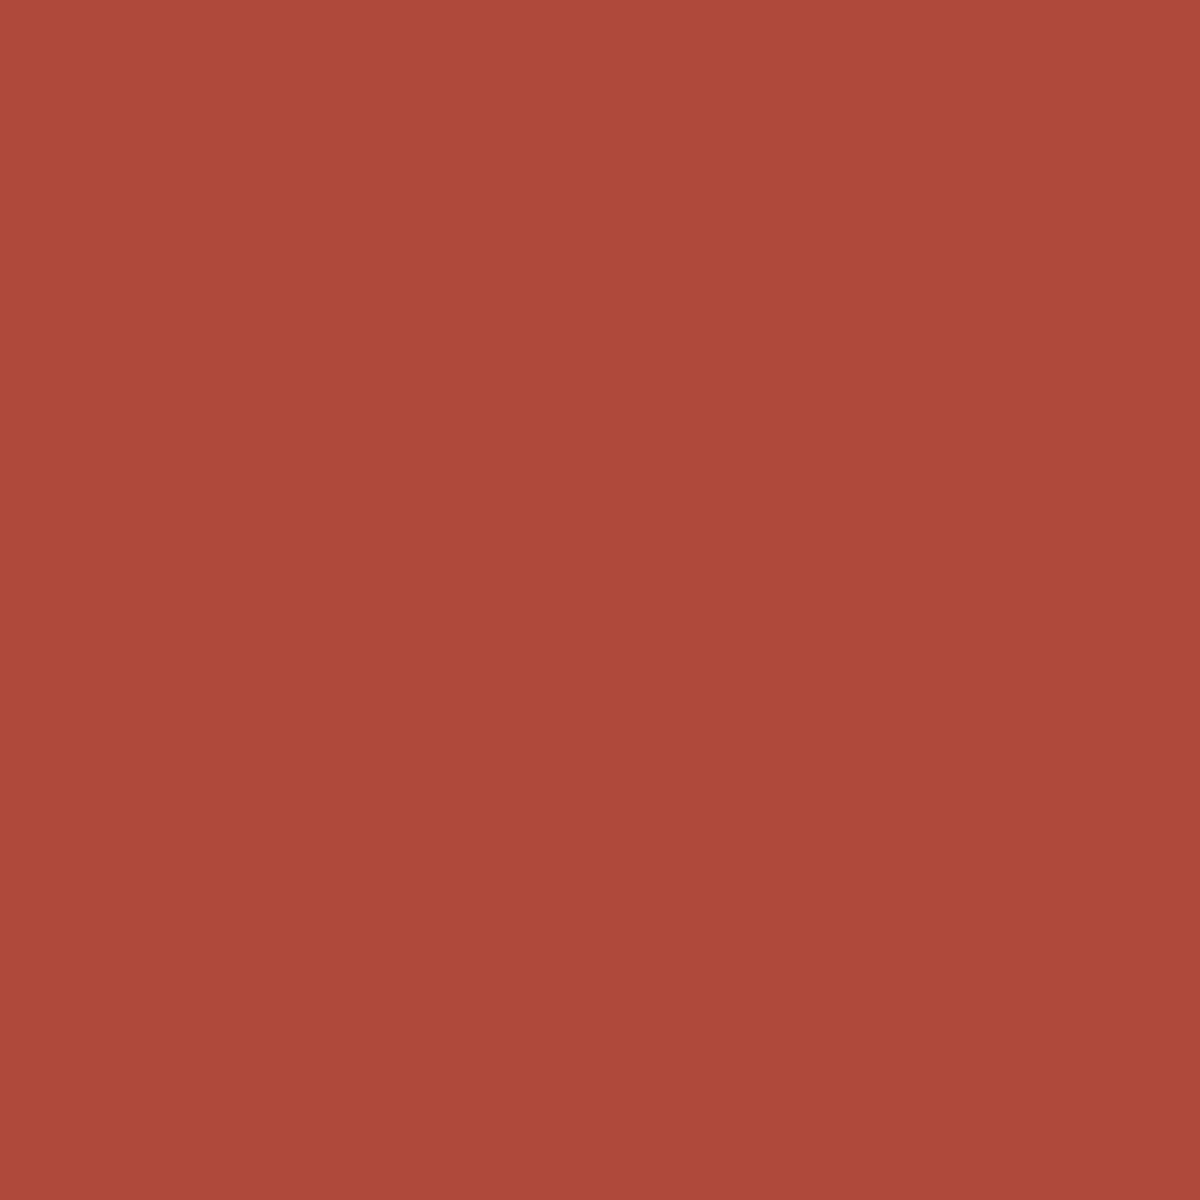 A Canyon red finish swatch.